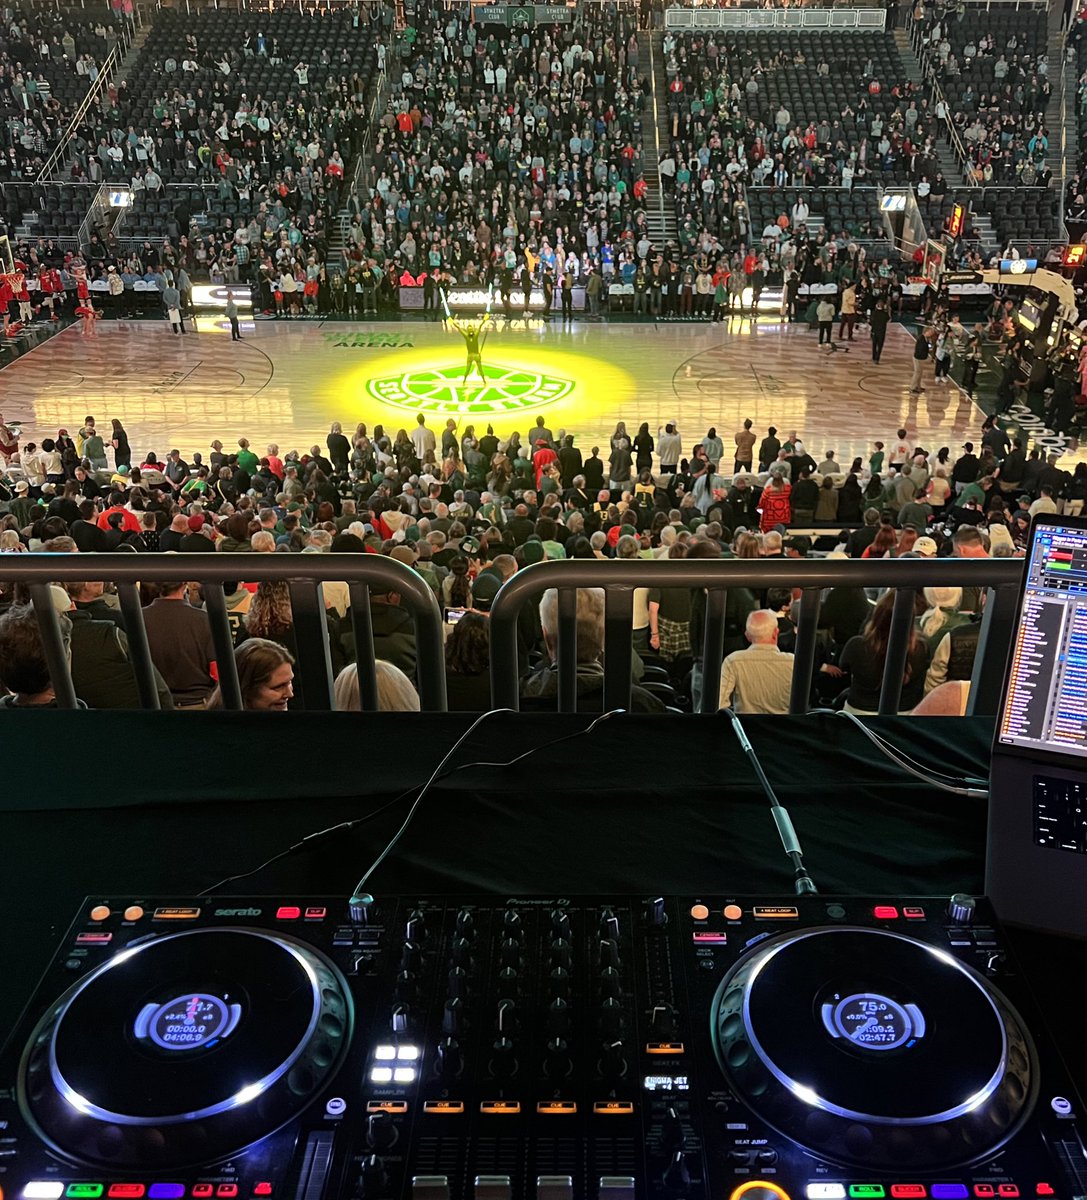 Saturday night Seattle Storm game views! Let’s go! 🎧🏀